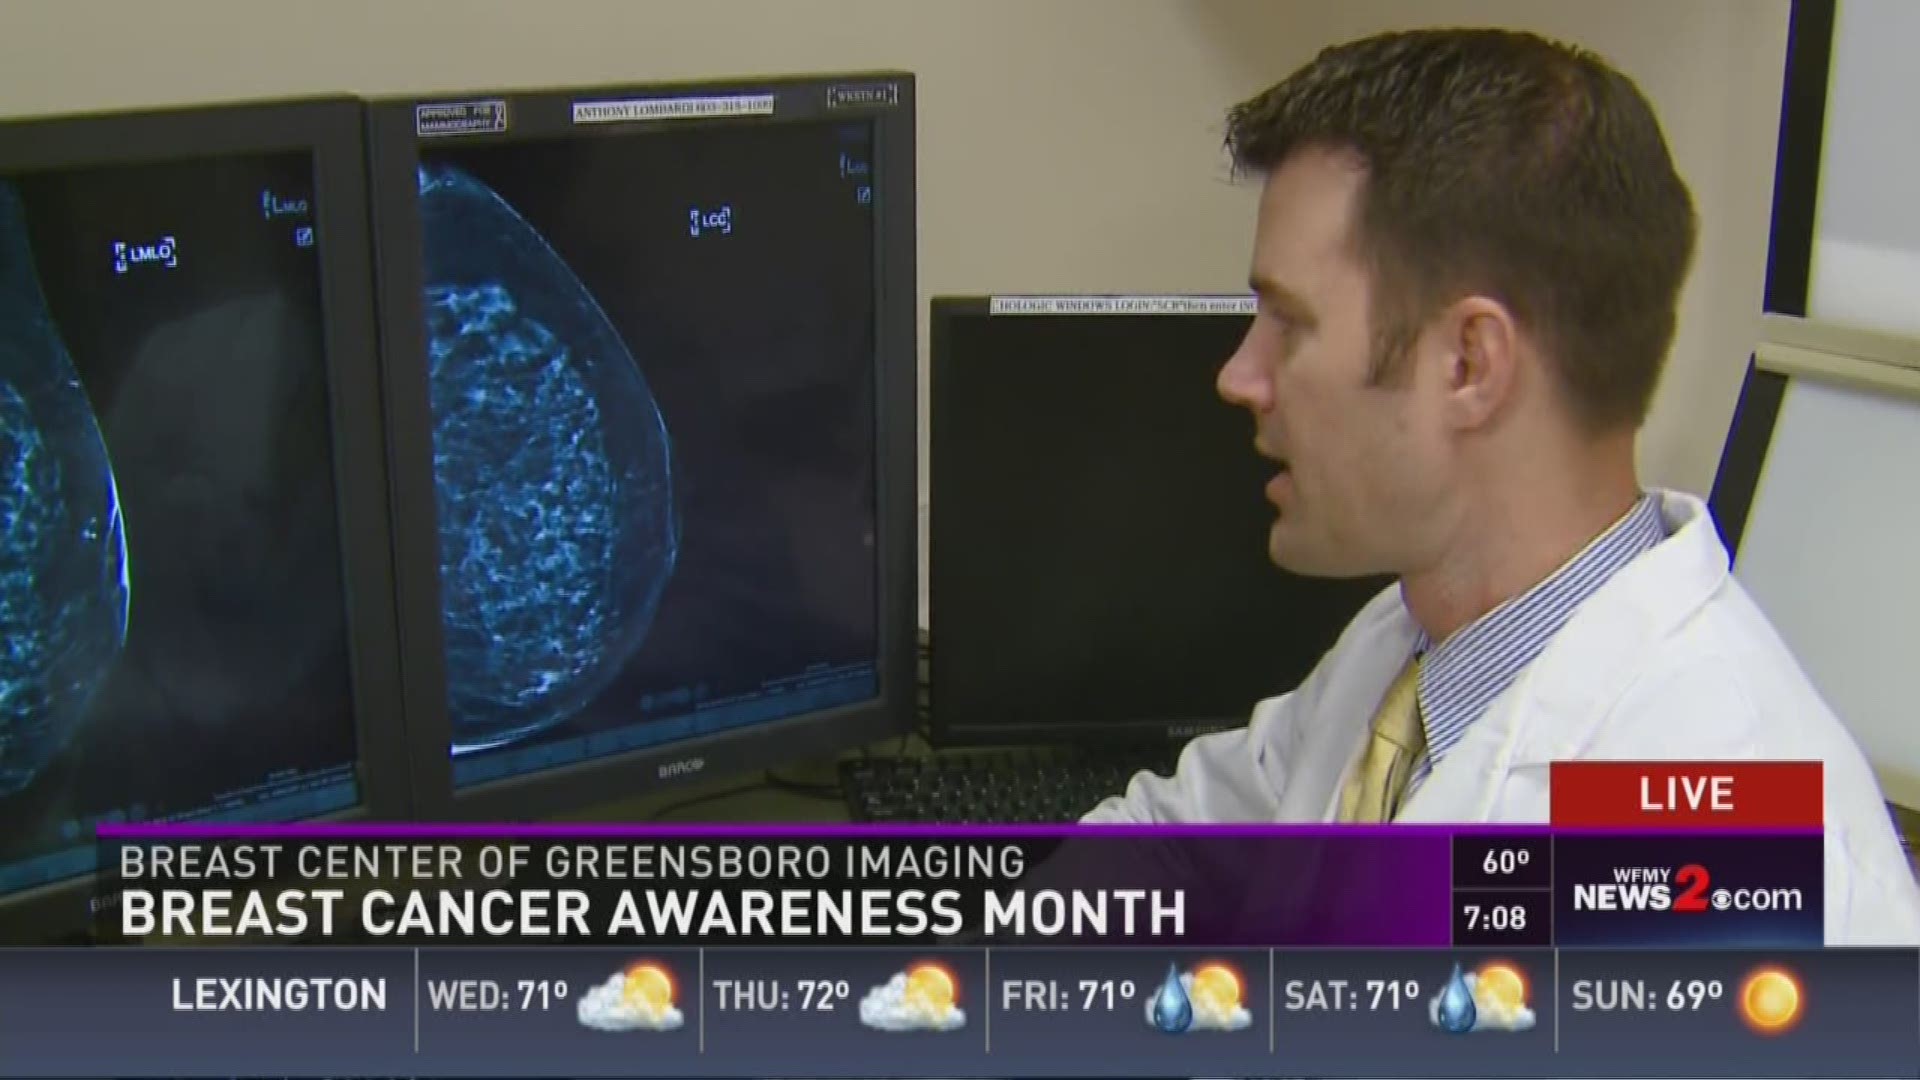 Breast Cancer Awareness Month At The Breast Center of Greensboro Imaging